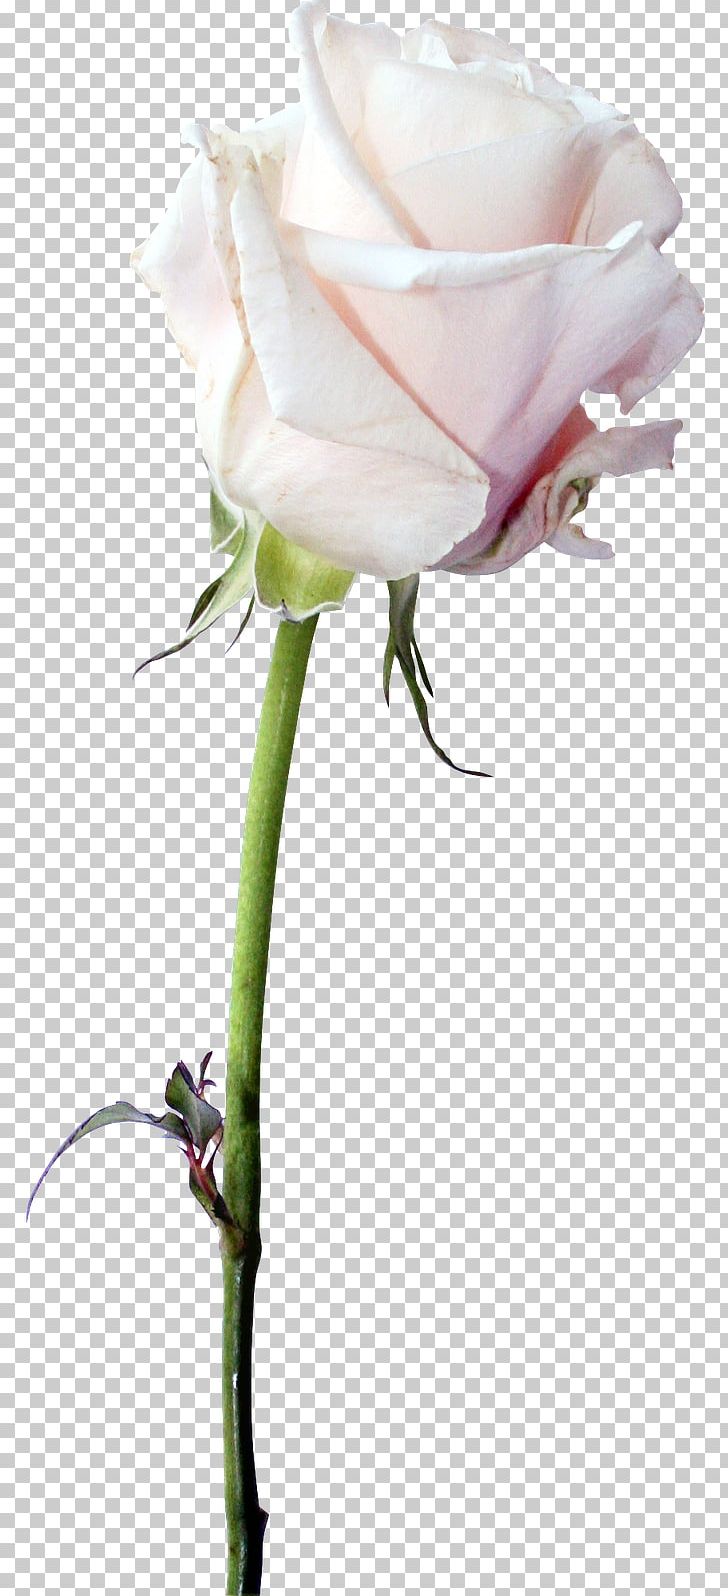 Garden Roses Cabbage Rose Cut Flowers Floral Design PNG, Clipart, 8 May, Artificial Flower, Bud, Closeup, Cut Flowers Free PNG Download